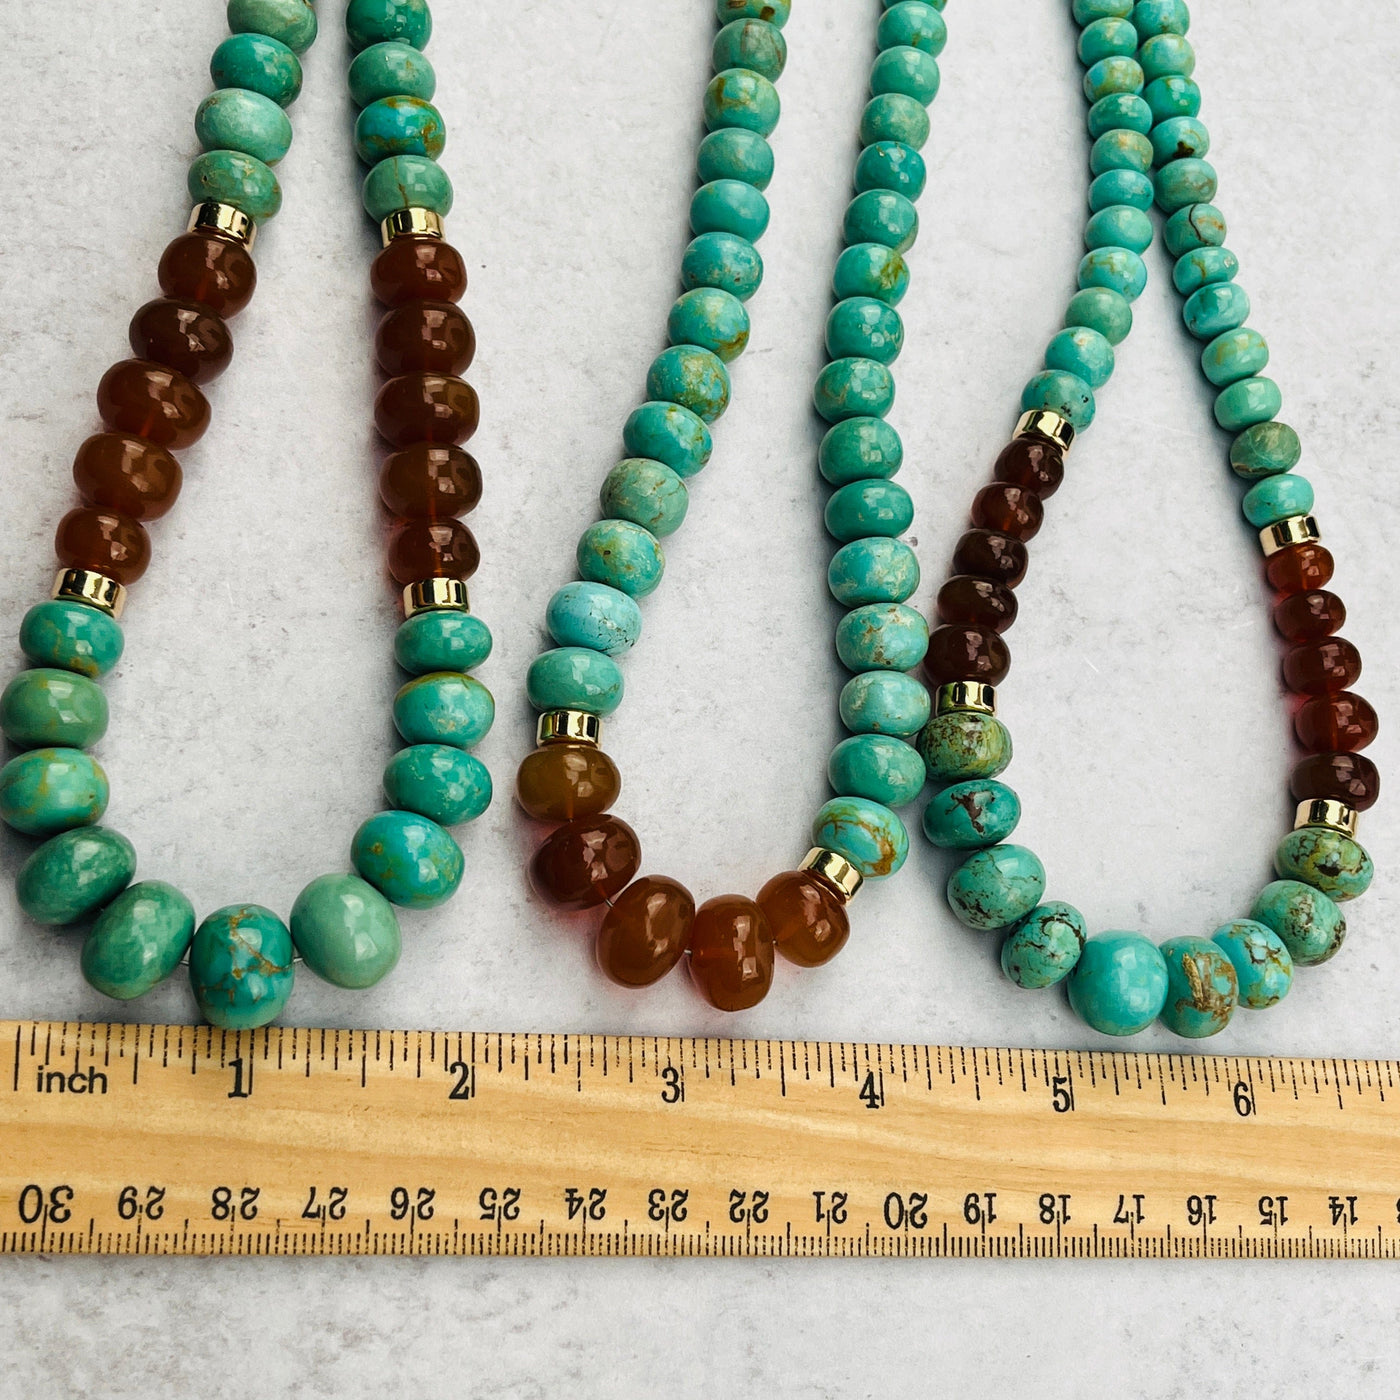 close up of the necklace beads next to a ruler for size reference 